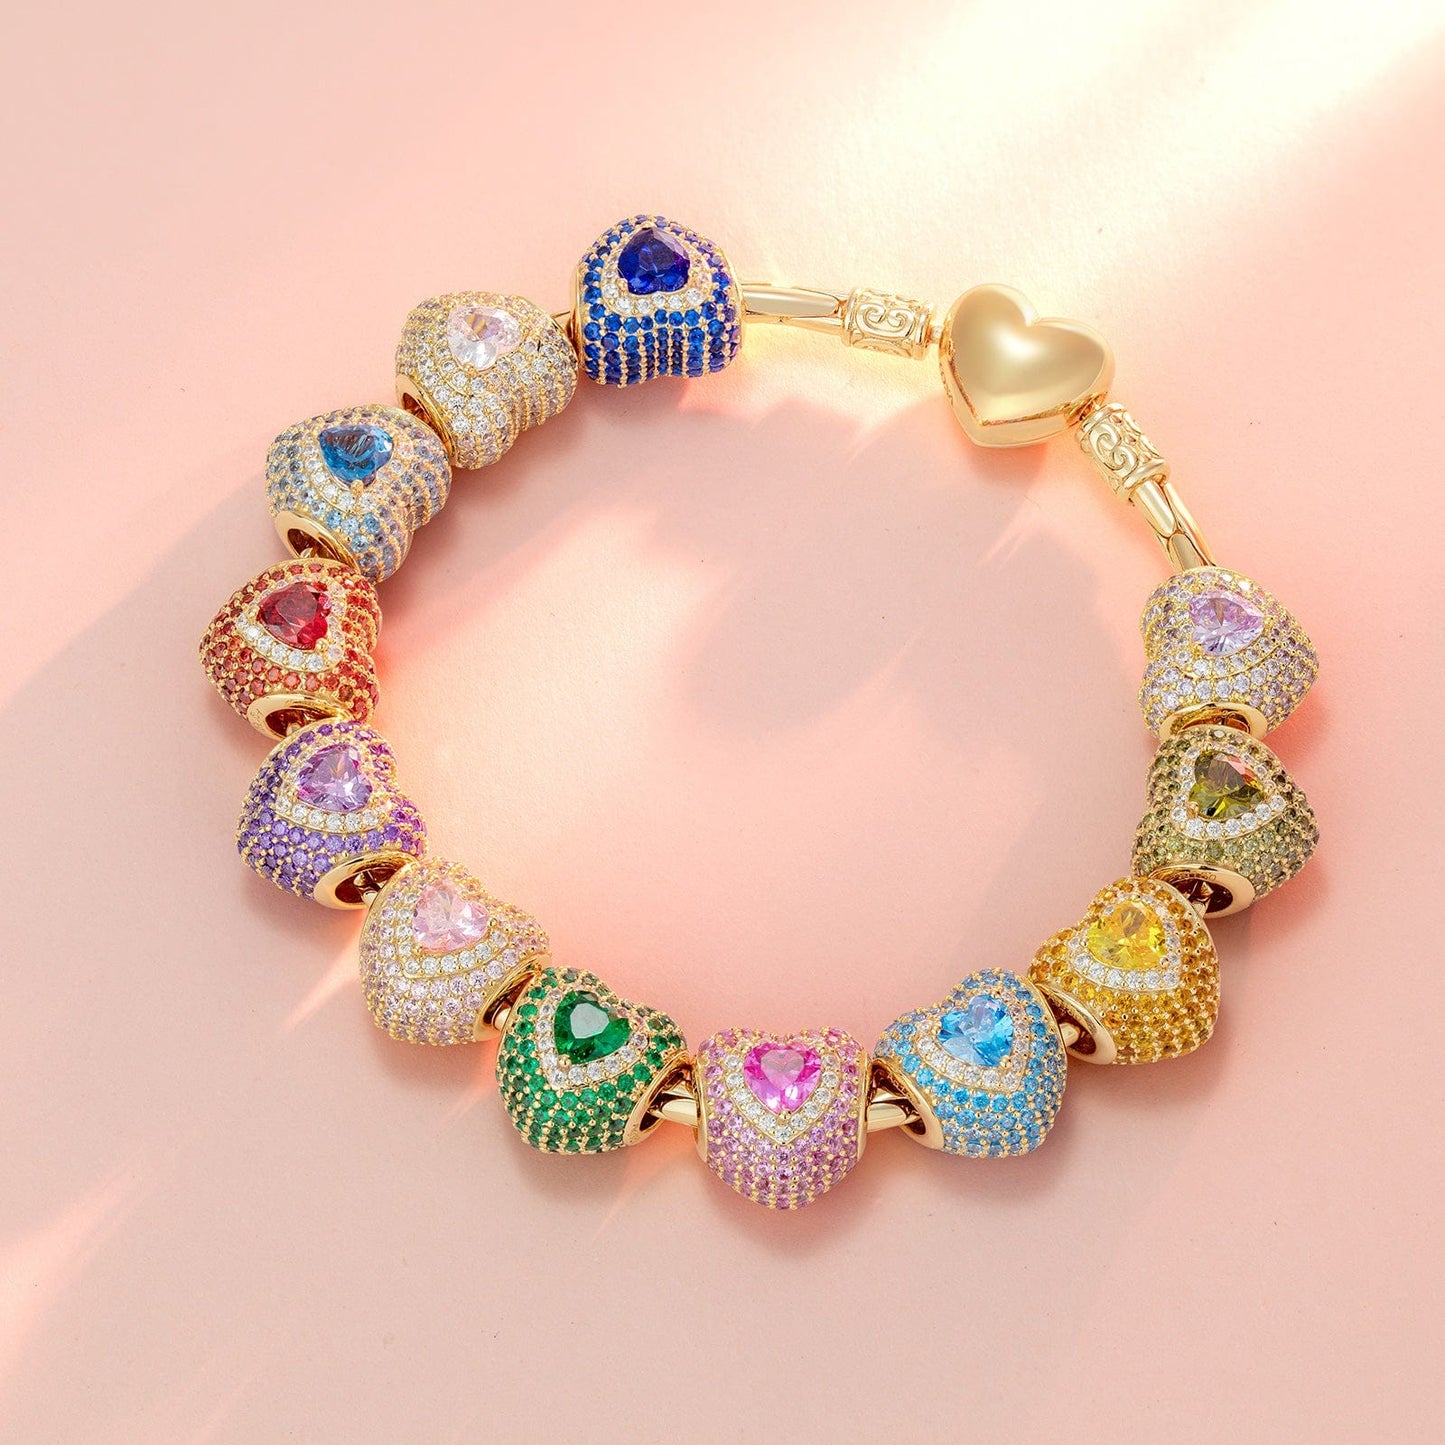 April Love Heart Birthstone Tarnish-resistant Silver Charms With Enamel In 14K Gold Plated